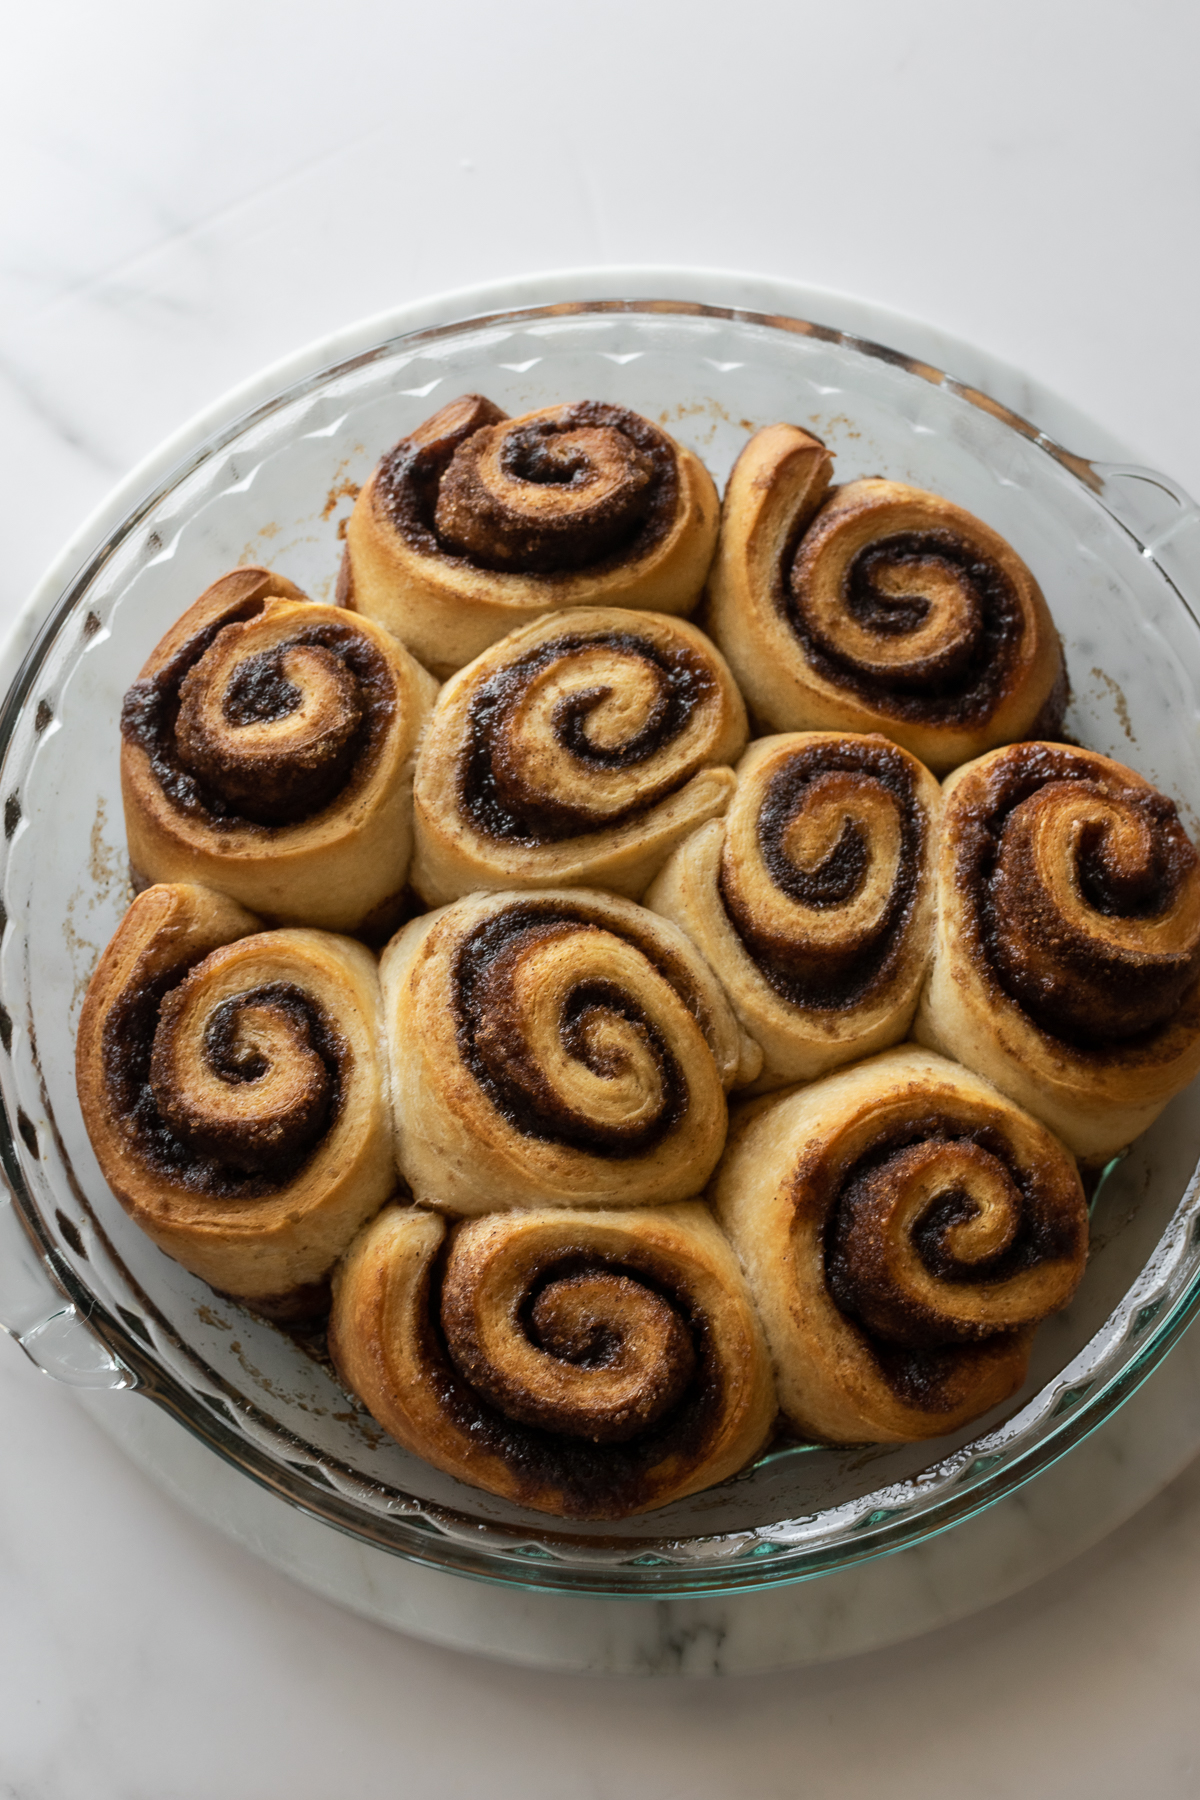 baked cinnamon rolls in a pie dish using crescent rolls.